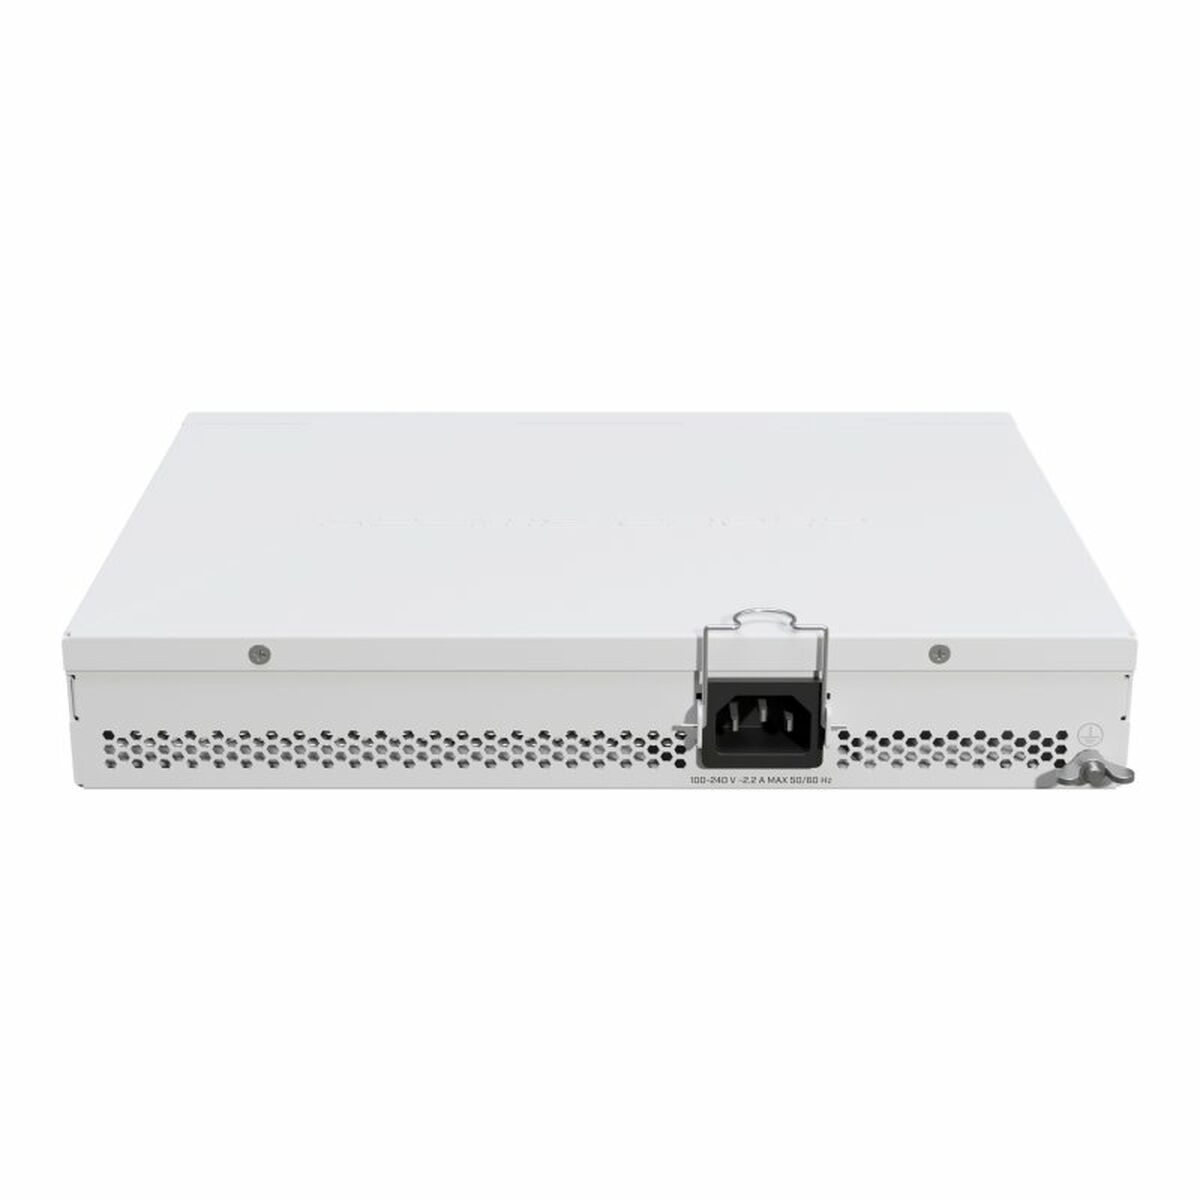 CSS610-8P-2S+IN MIKROTIK 10 Switch